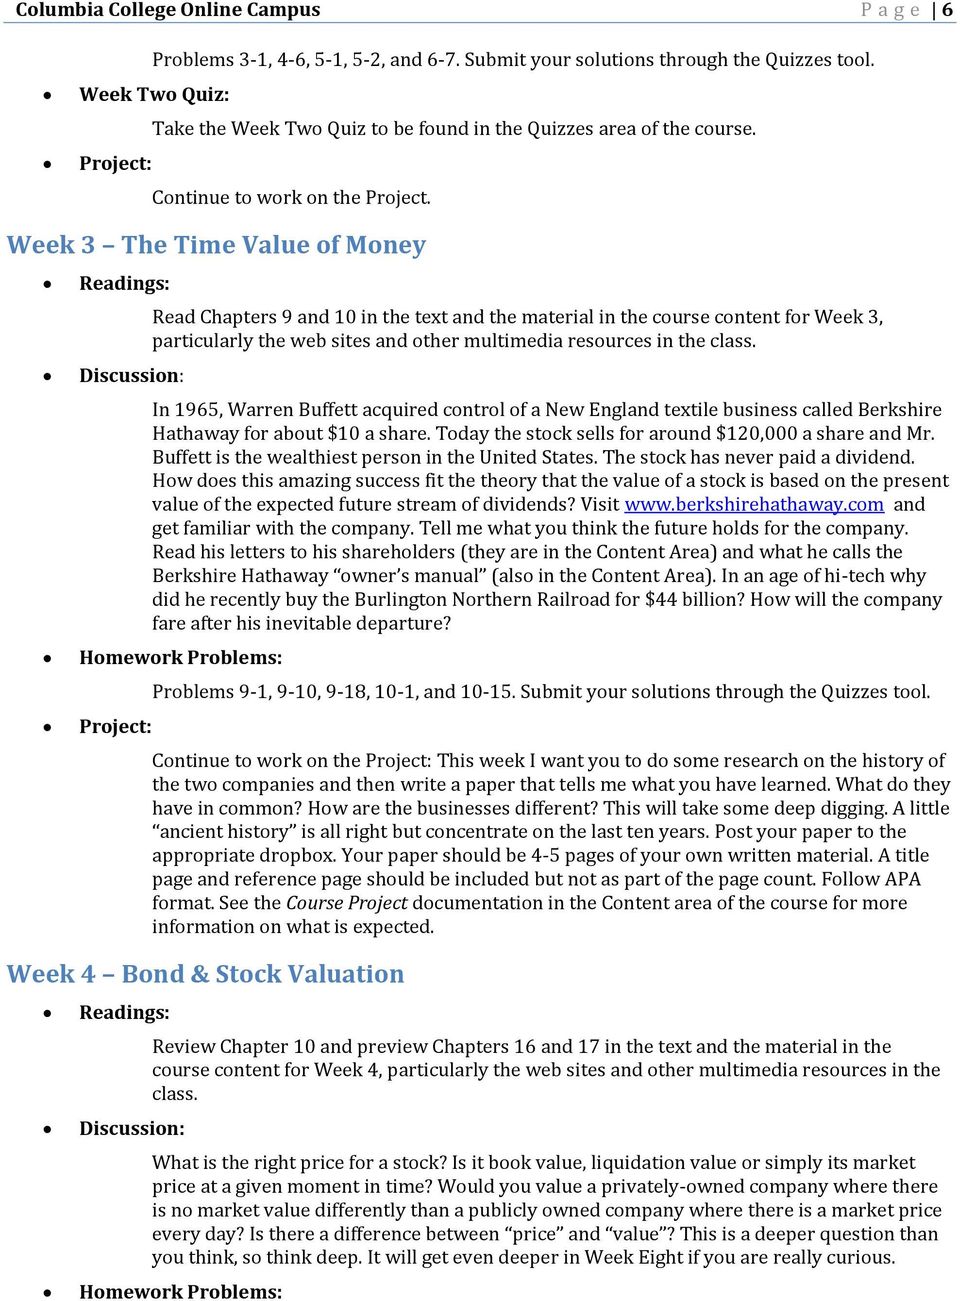 Week 3 The Time Value of Money Read Chapters 9 and 10 in the text and the material in the course content for Week 3, particularly the web sites and other multimedia resources in the class.